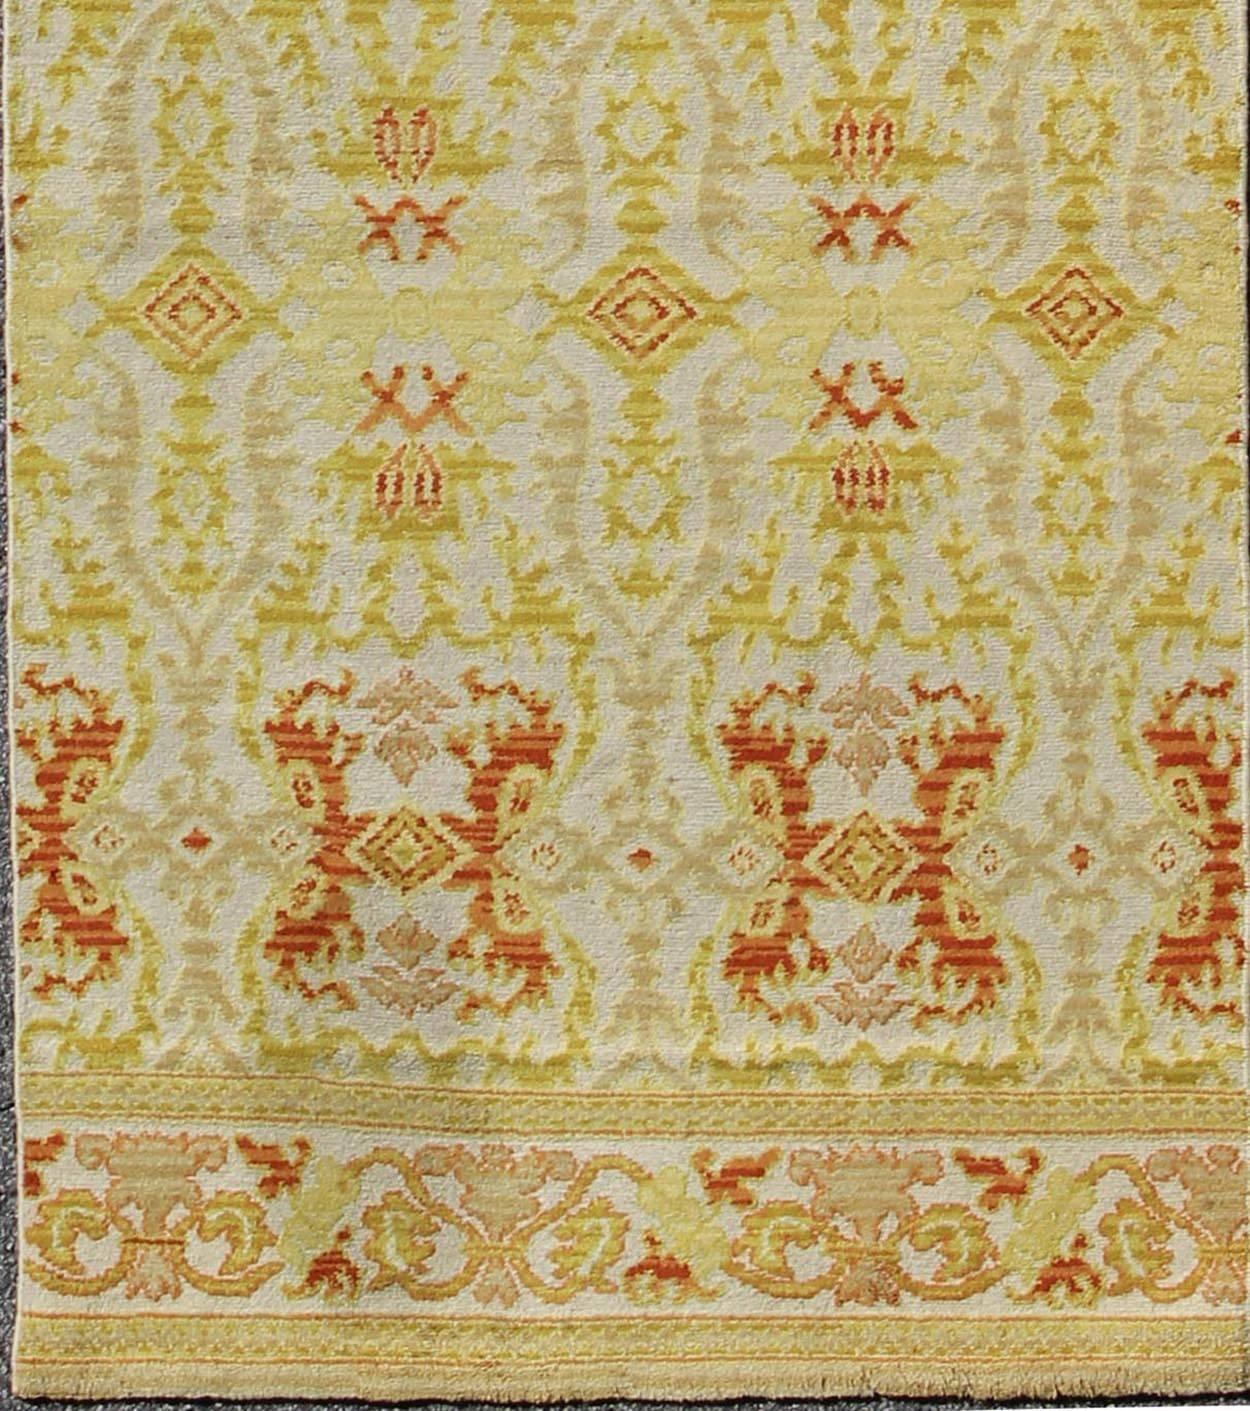 Green, yellow, orange antique Spanish runner feat. in Atlanta homes and lifestyles, rug B-0304-A, country of origin / type: Spain / Spanish, circa 1920

Measures: 3'10 x 14'

This stunning antique Spanish runner fragment bears a lovely repeating